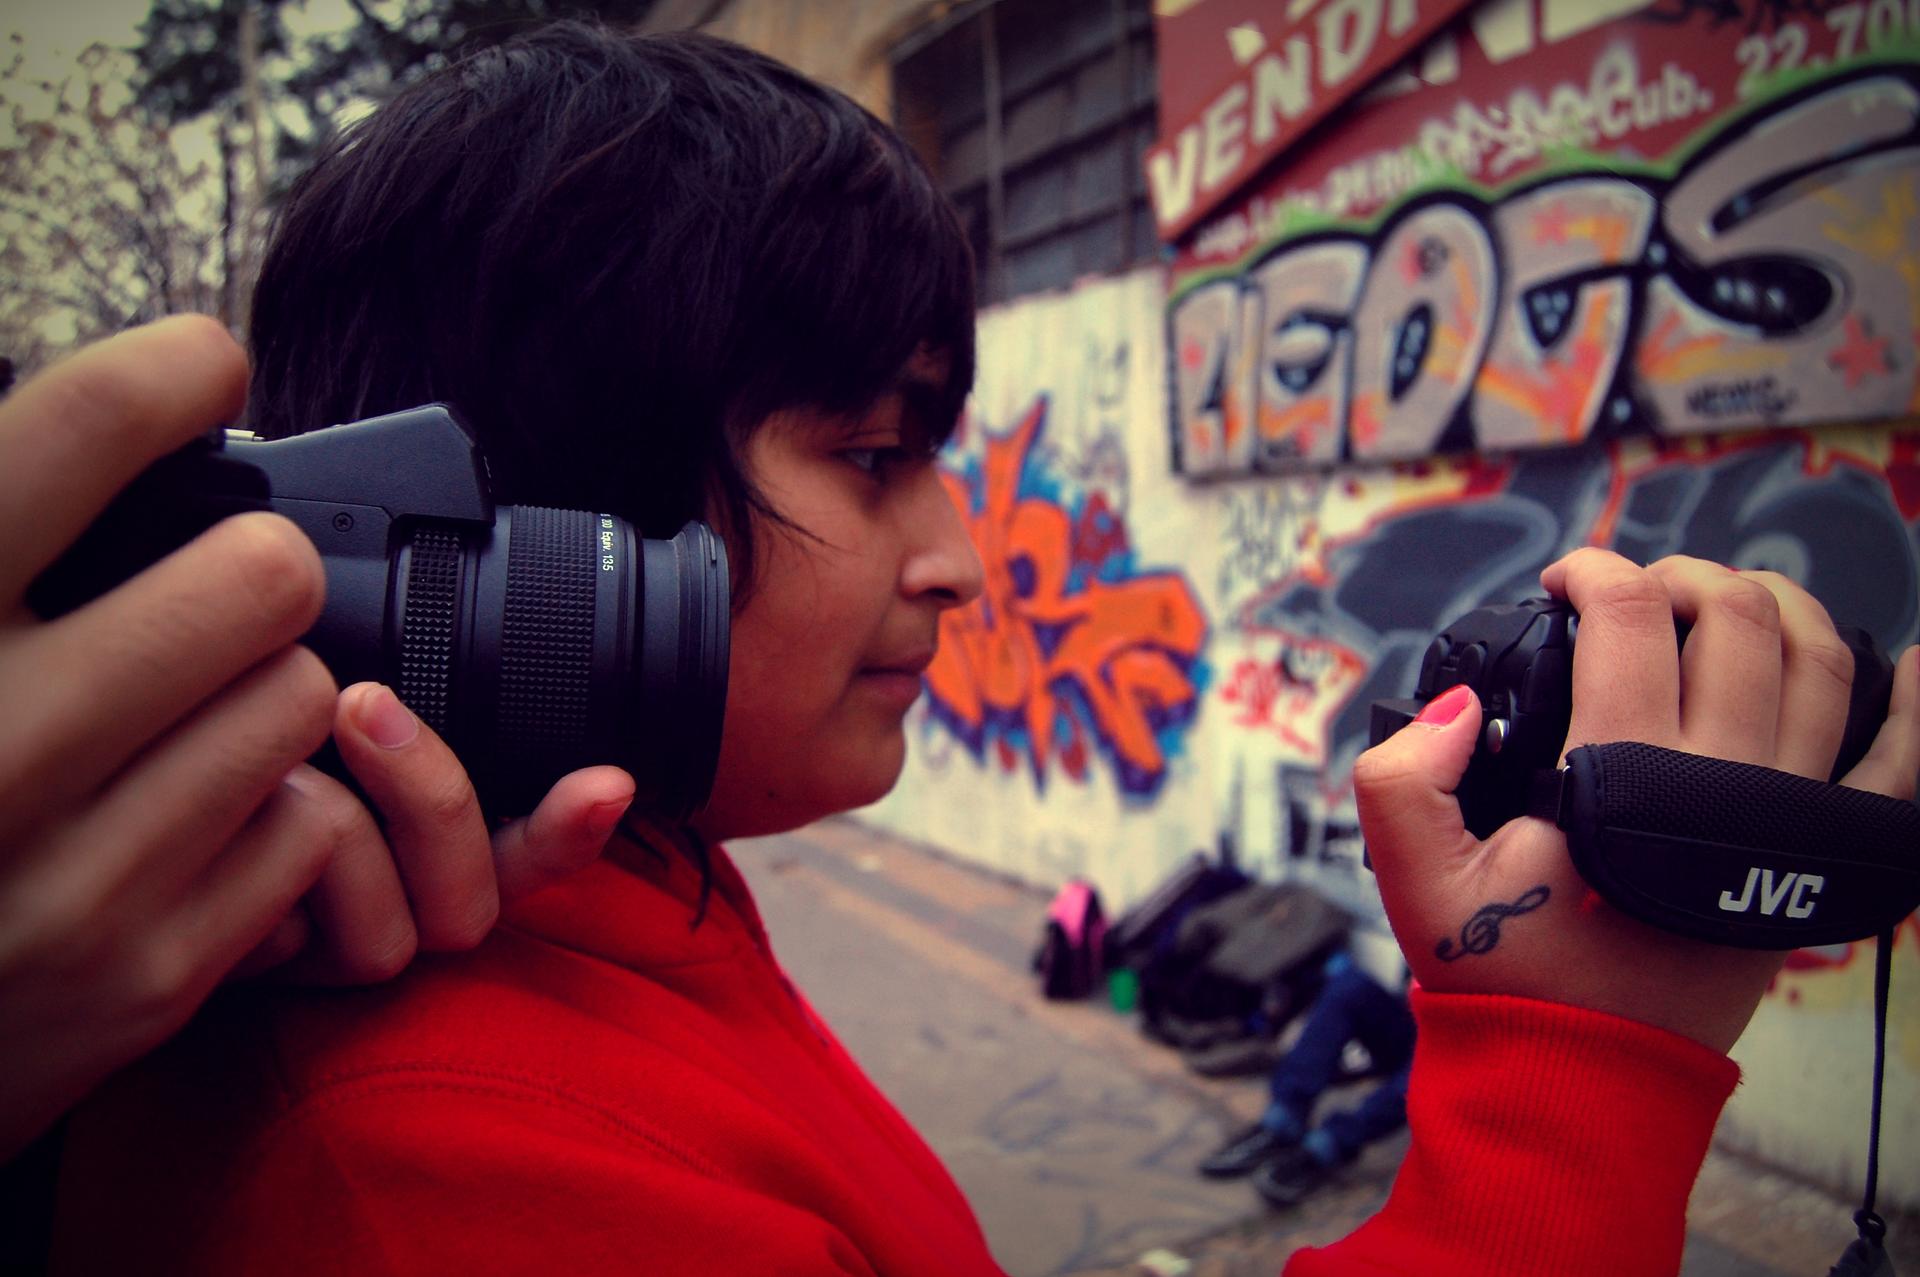 Teenagers film video in Argentina. A new study says that adolescents seem to have become more creative in visual arts.